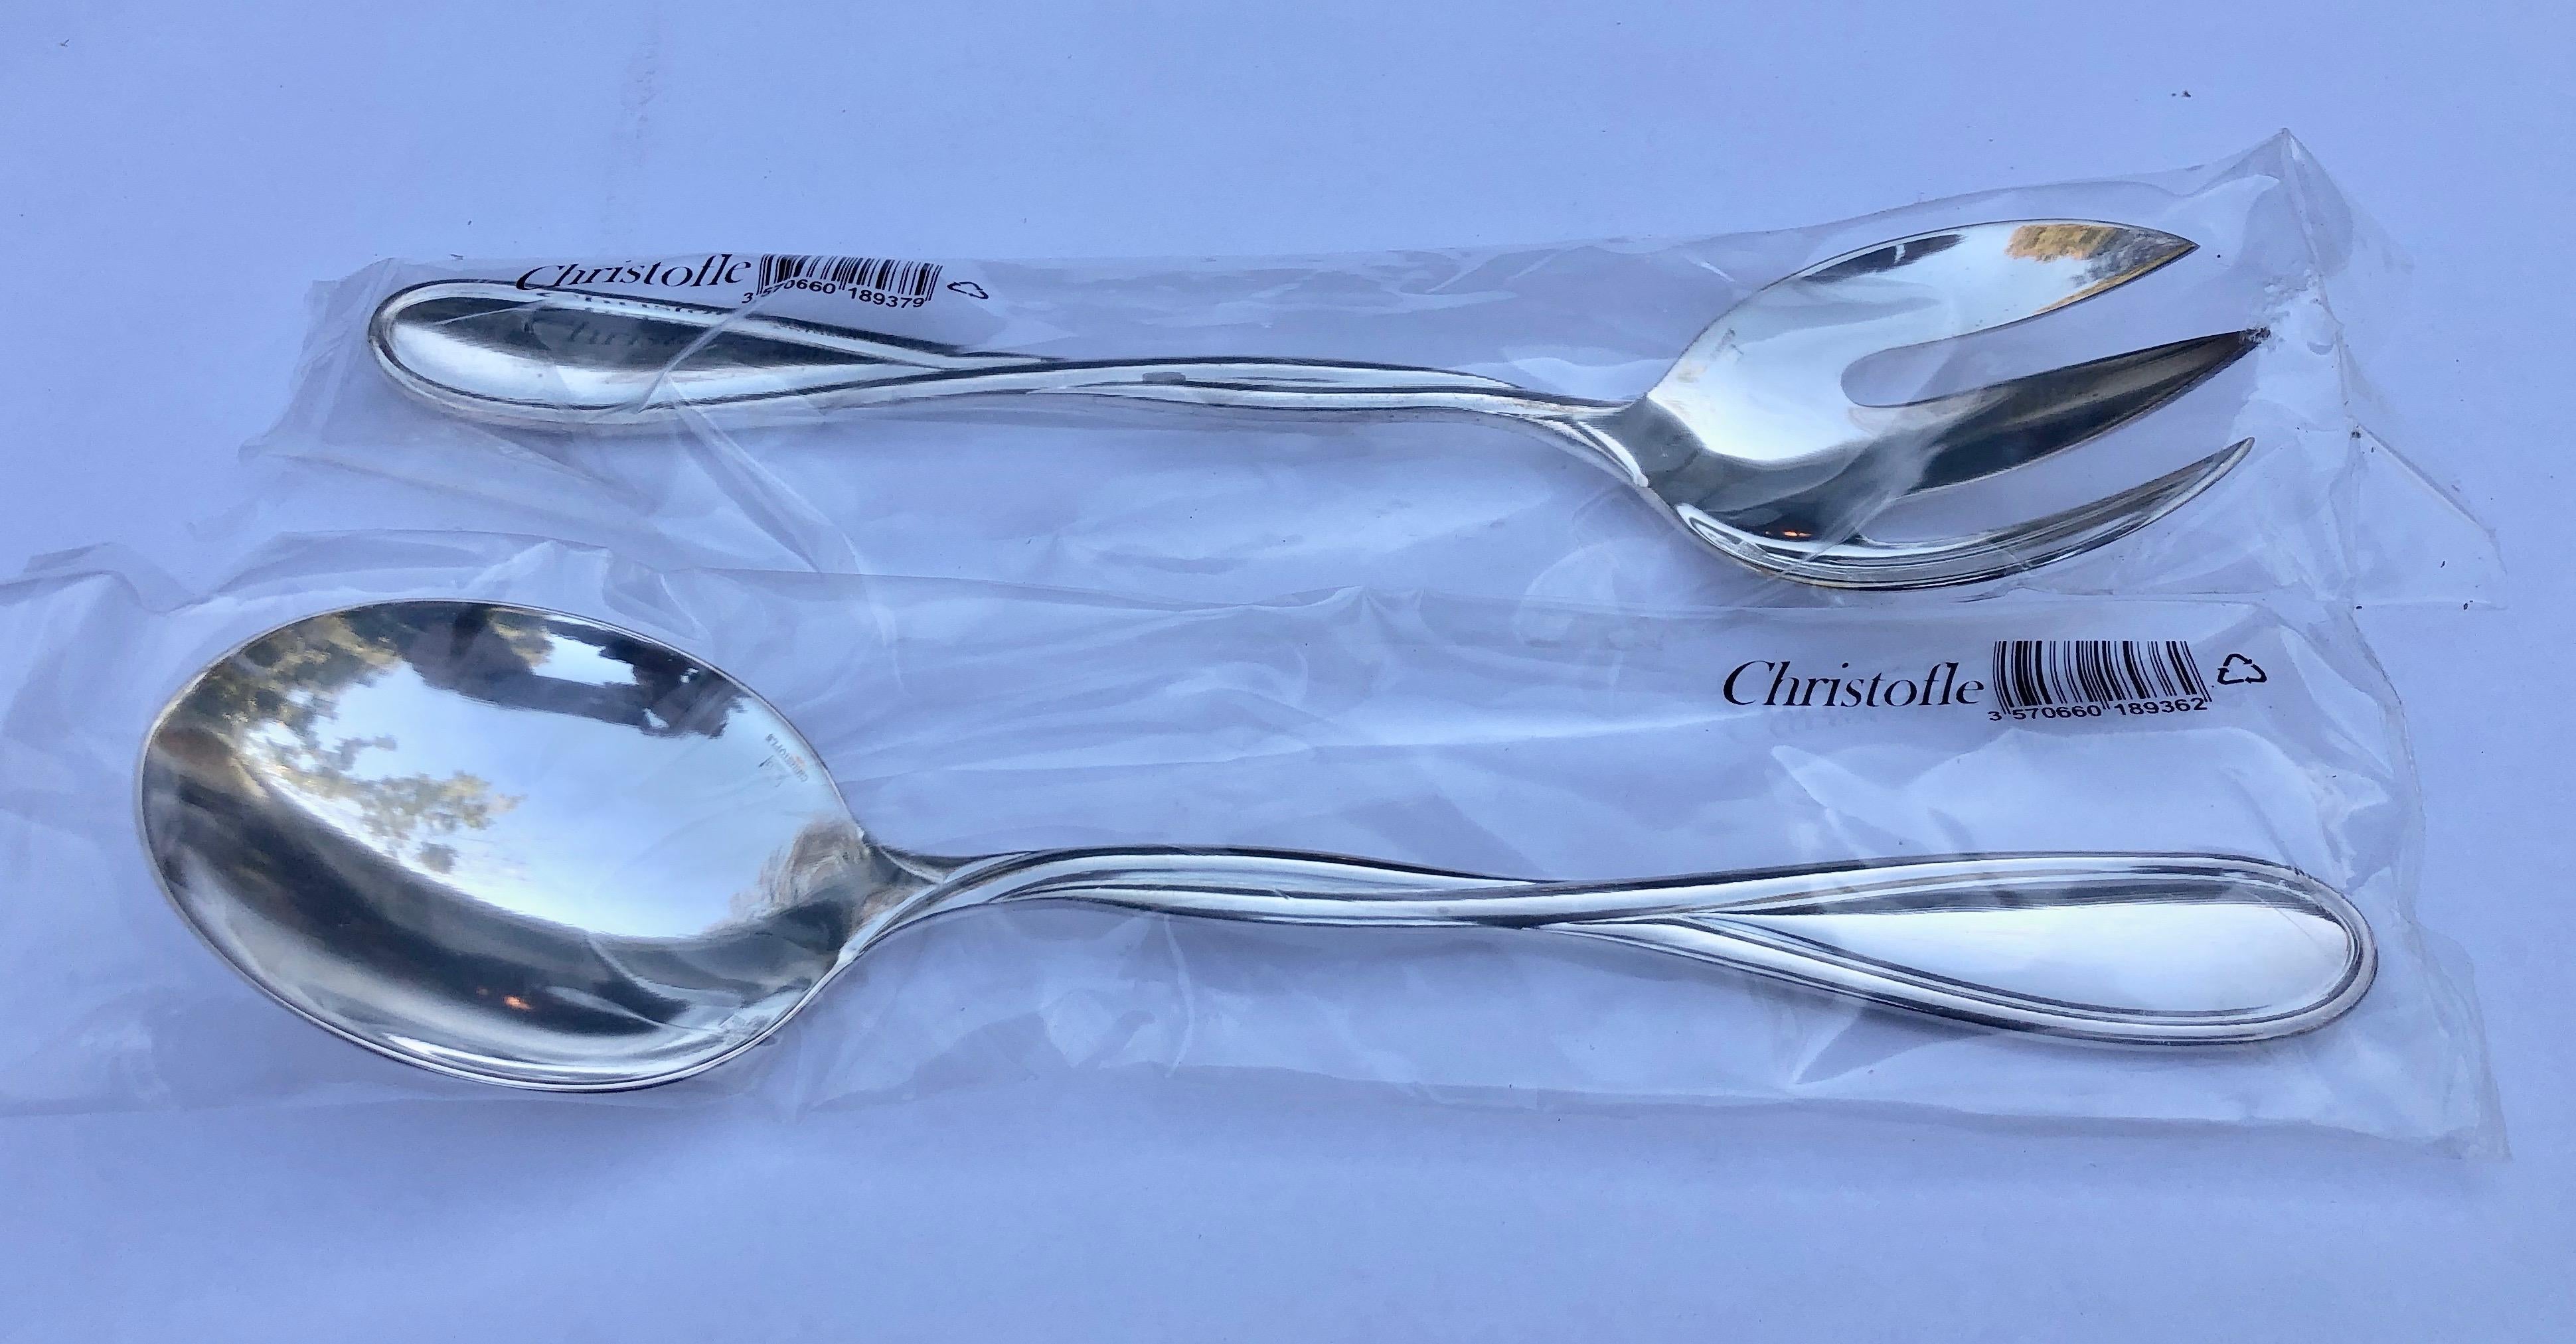 French Christofle Silver Plated Galea, Salad Set of a Serving Fork and Spoon In Excellent Condition For Sale In Petaluma, CA